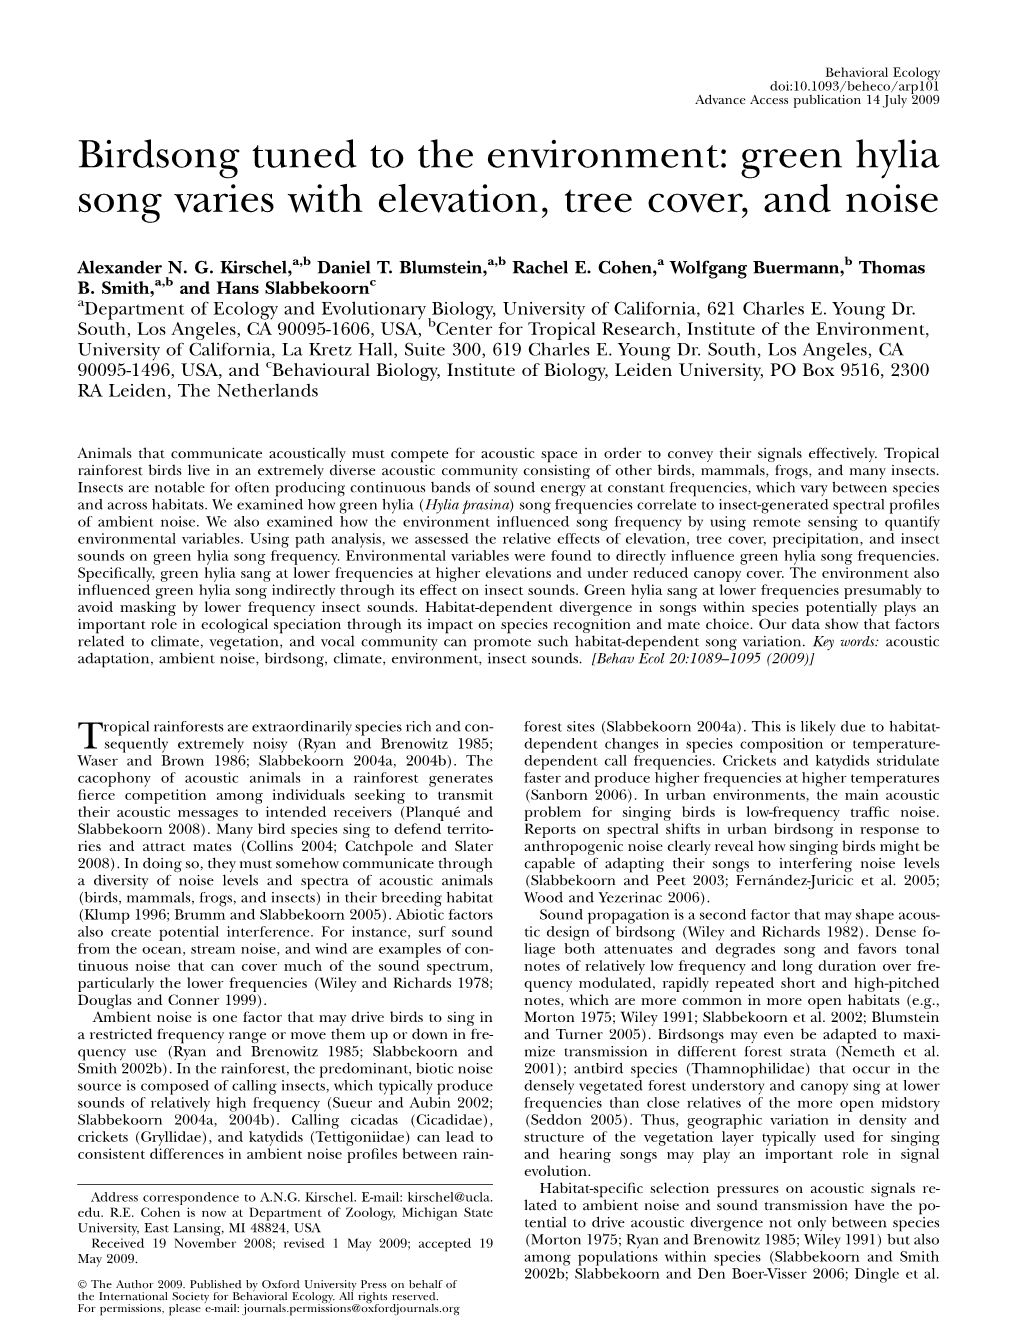 Birdsong Tuned to the Environment: Green Hylia Song Varies with Elevation, Tree Cover, and Noise